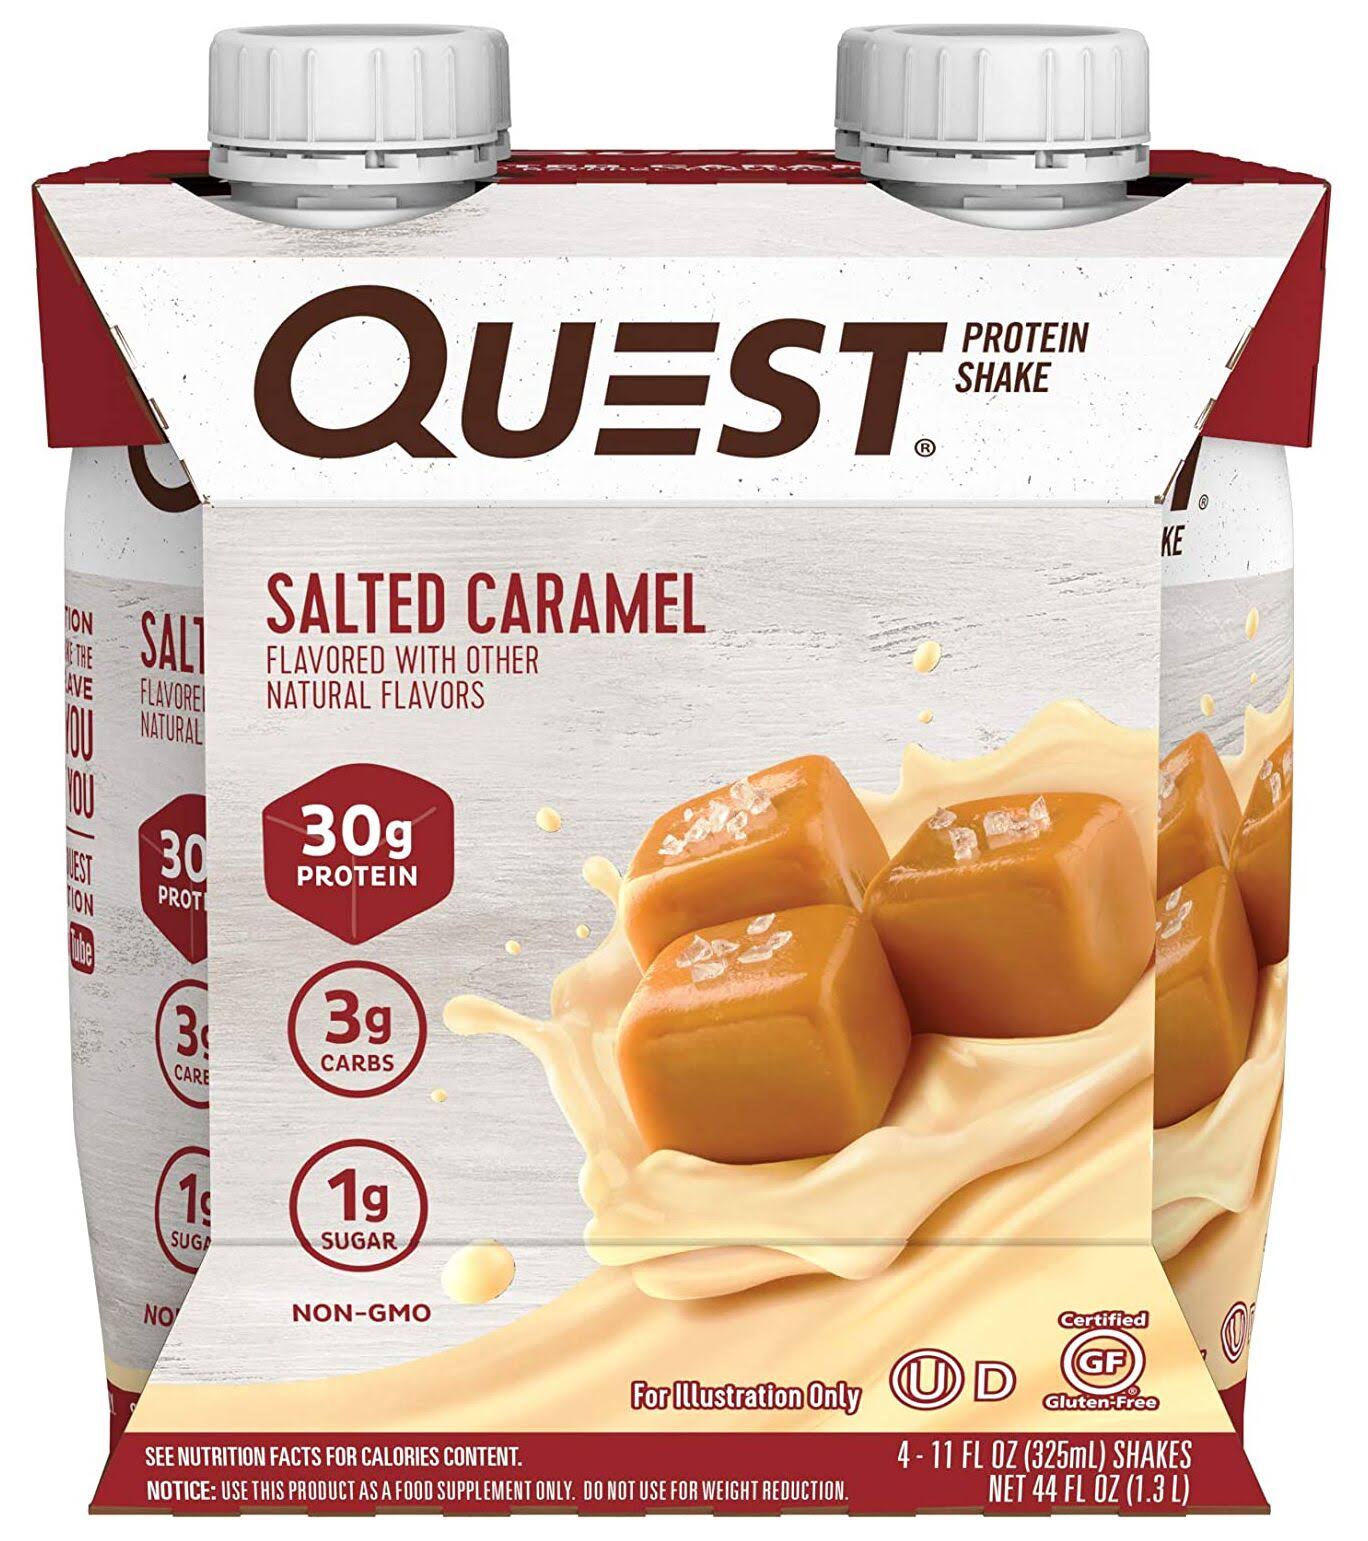 Quest Ready-to-Drink Protein Shake - Salted Caramel